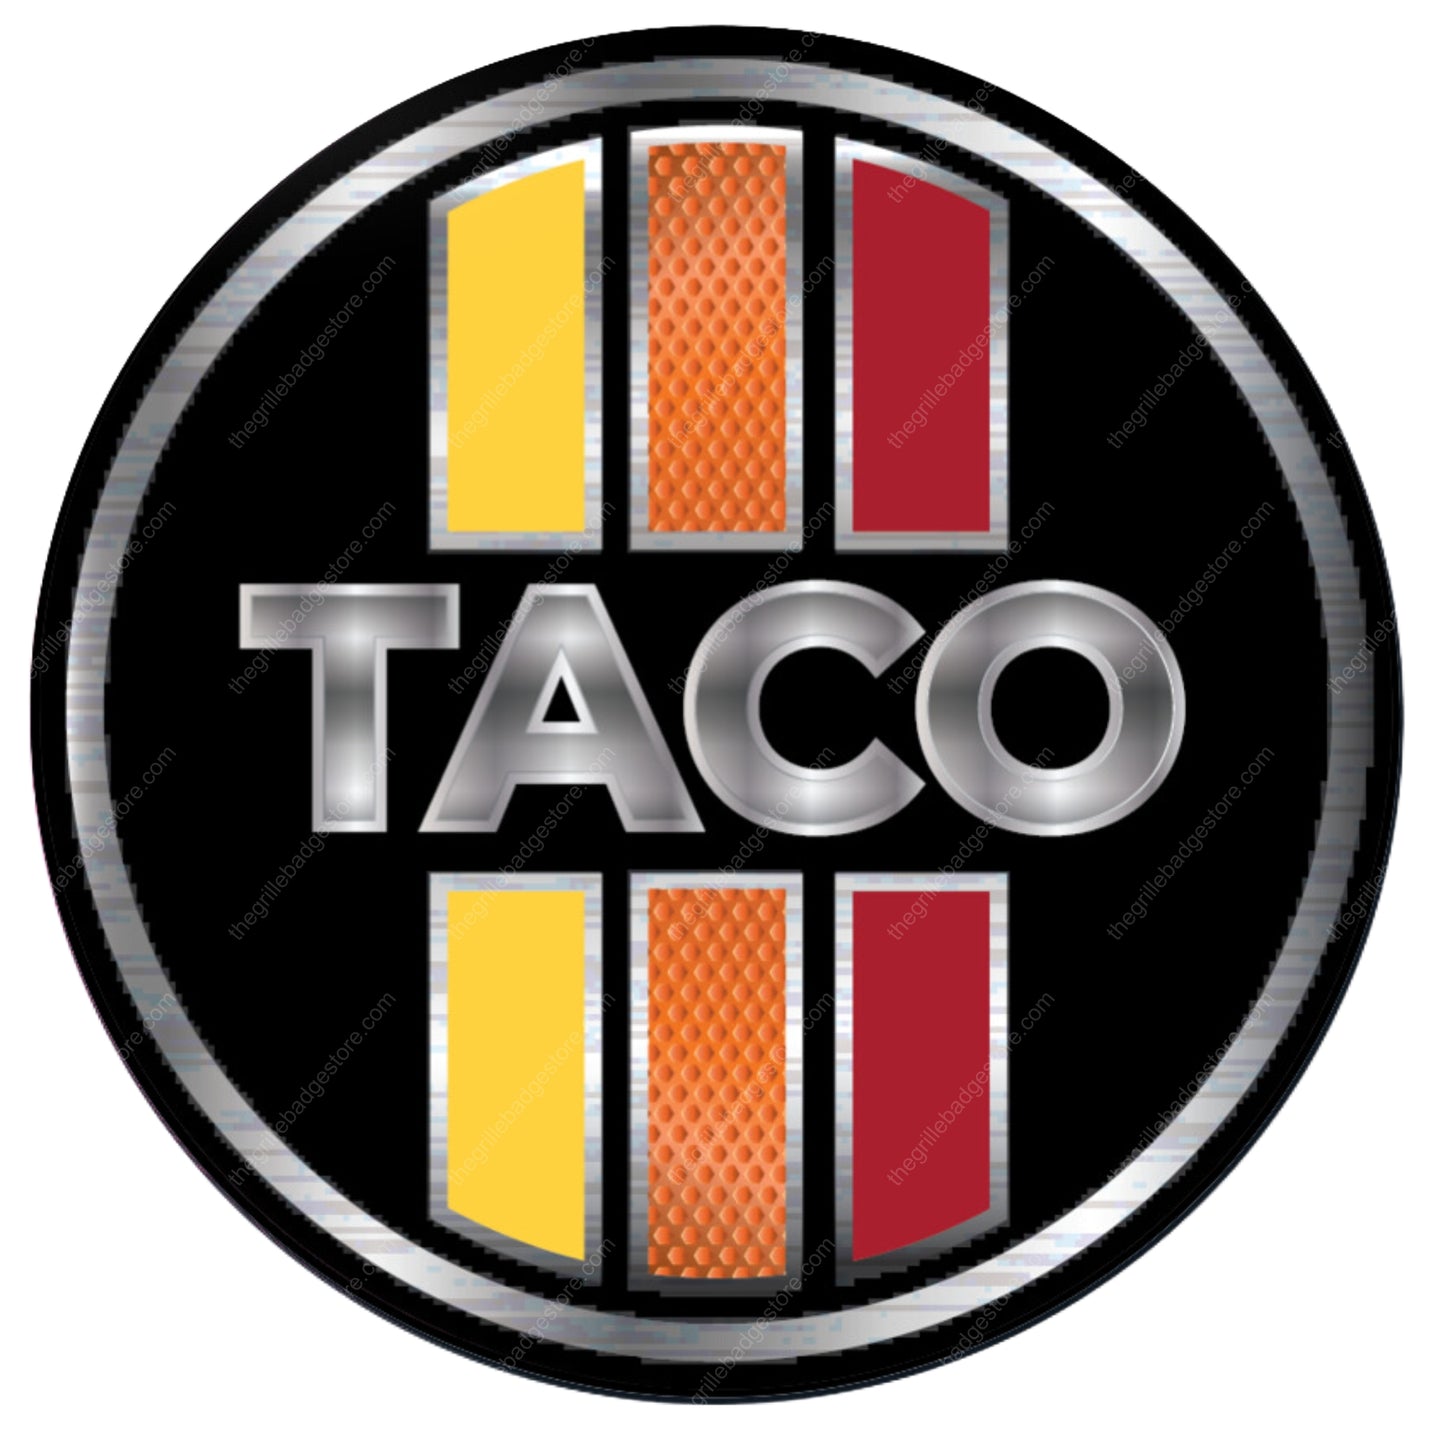 Standard Tacoma Grille Badge - Looking for Tri Color aftermarket grille or badge parts for Tacoma SR5, TRD Sport, TRD Off-road, TRD Pro Limited Tacoma Lifestyle or largest forum Tacoma World Fits TRD Badge Tacoma Badge, Tri Color Style Vinyl Upland